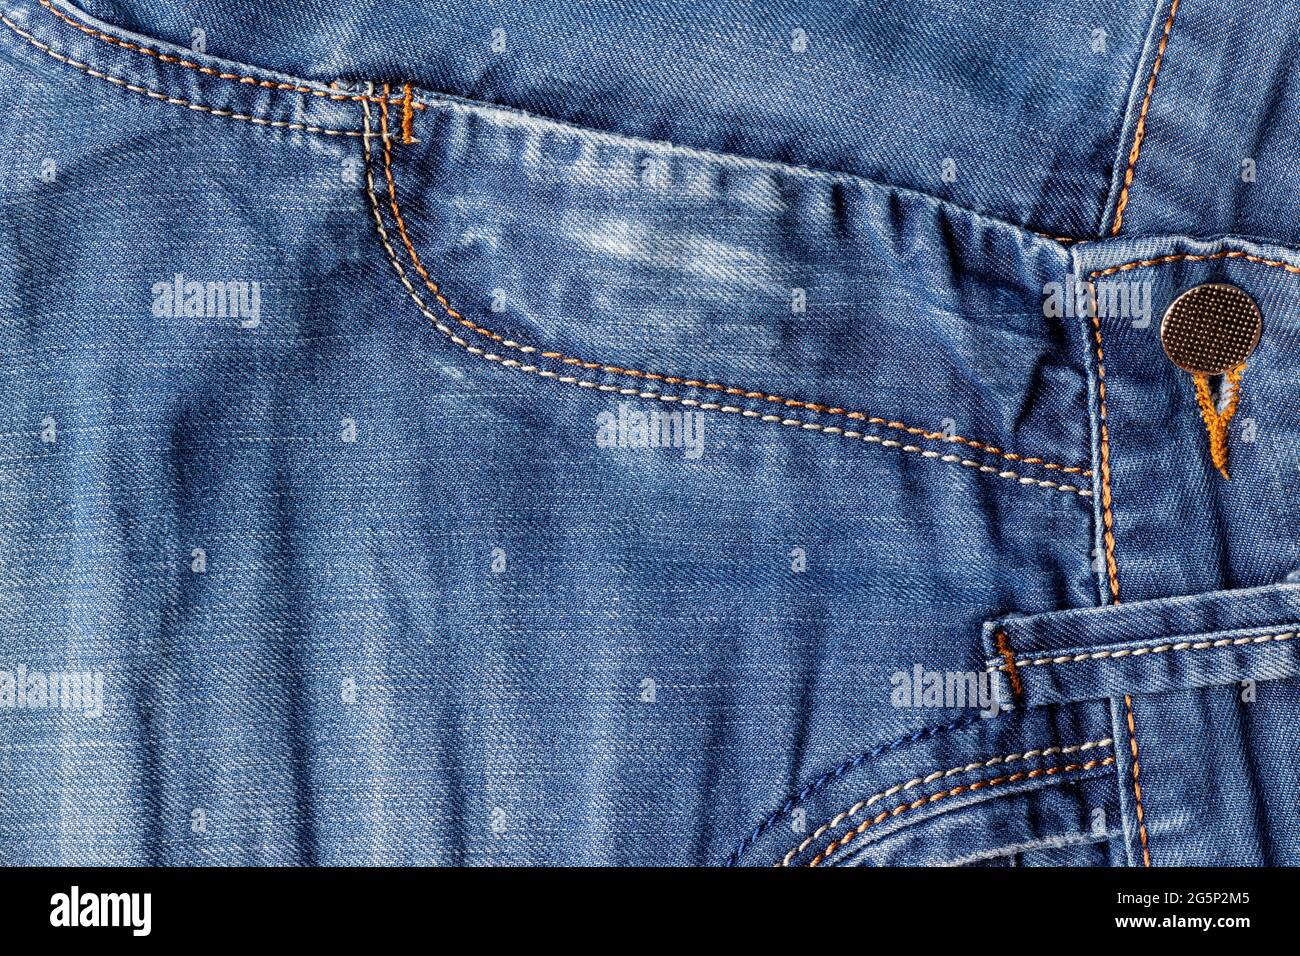 Blue jeans fabric background texture. Distressed denim with seams ...